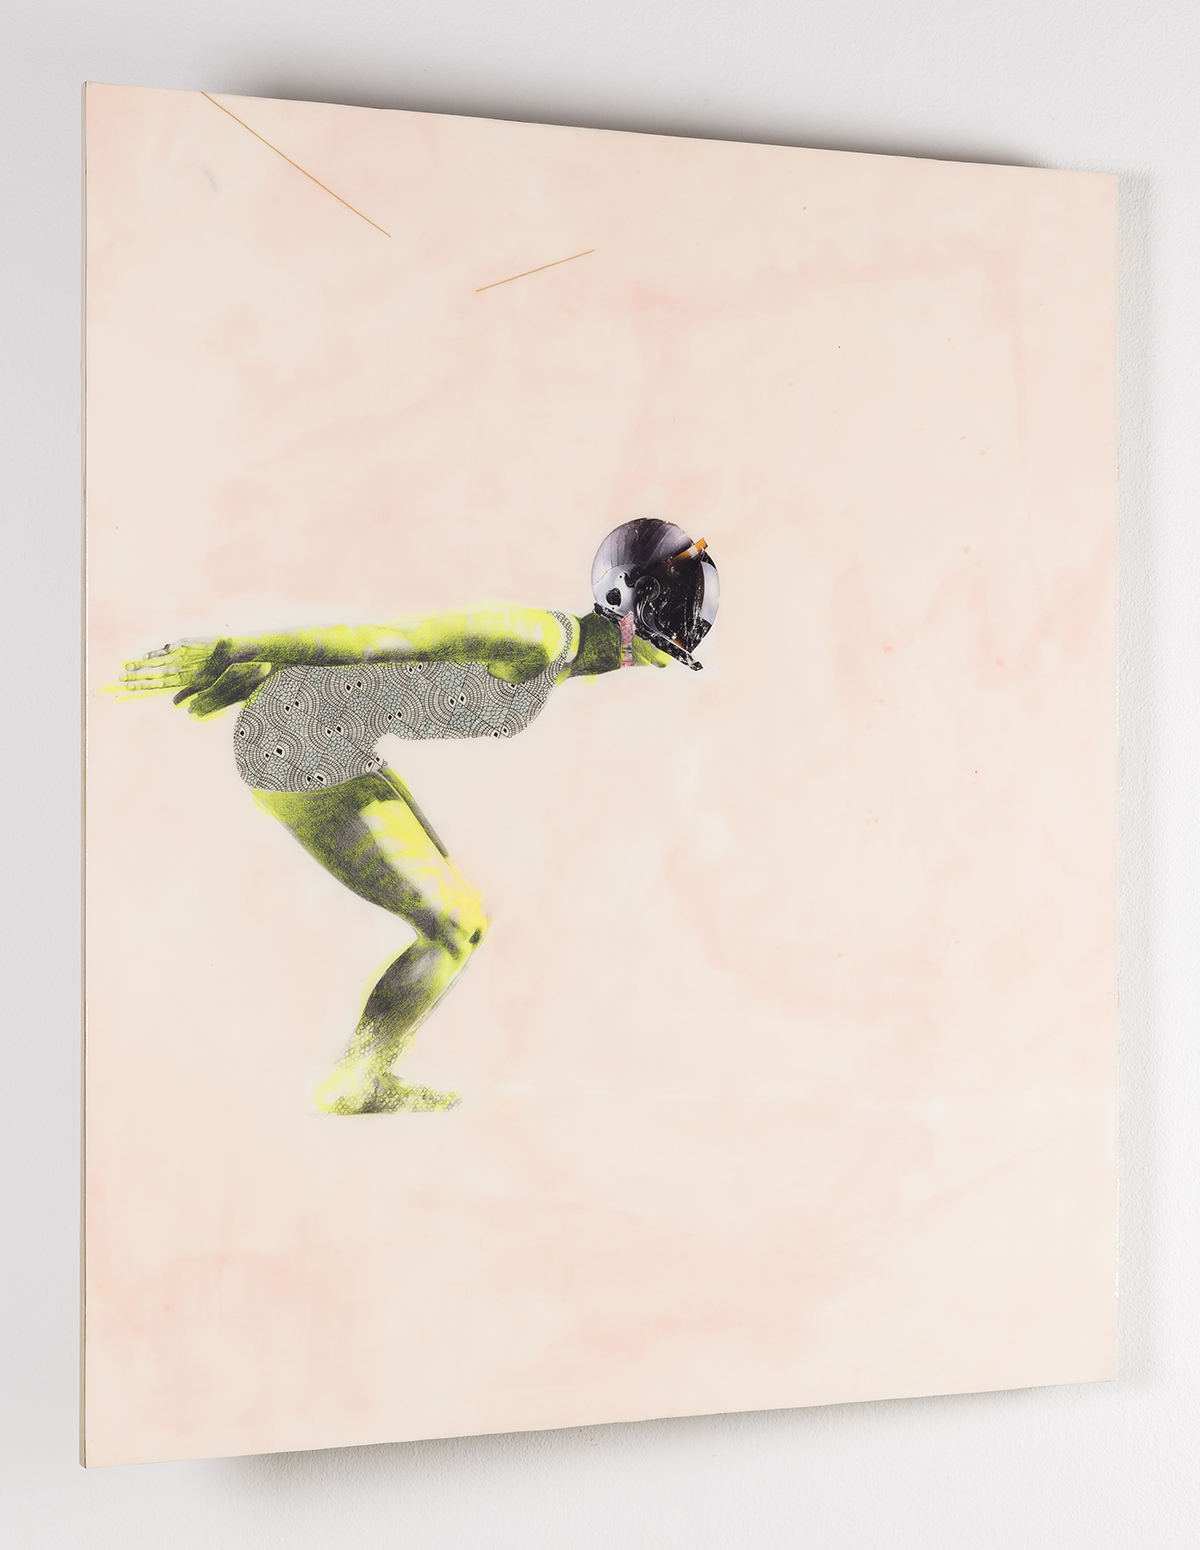 ruby onyinyechi amanze's drawing of an abstract figure crouched in a diving pose against a pale pink background